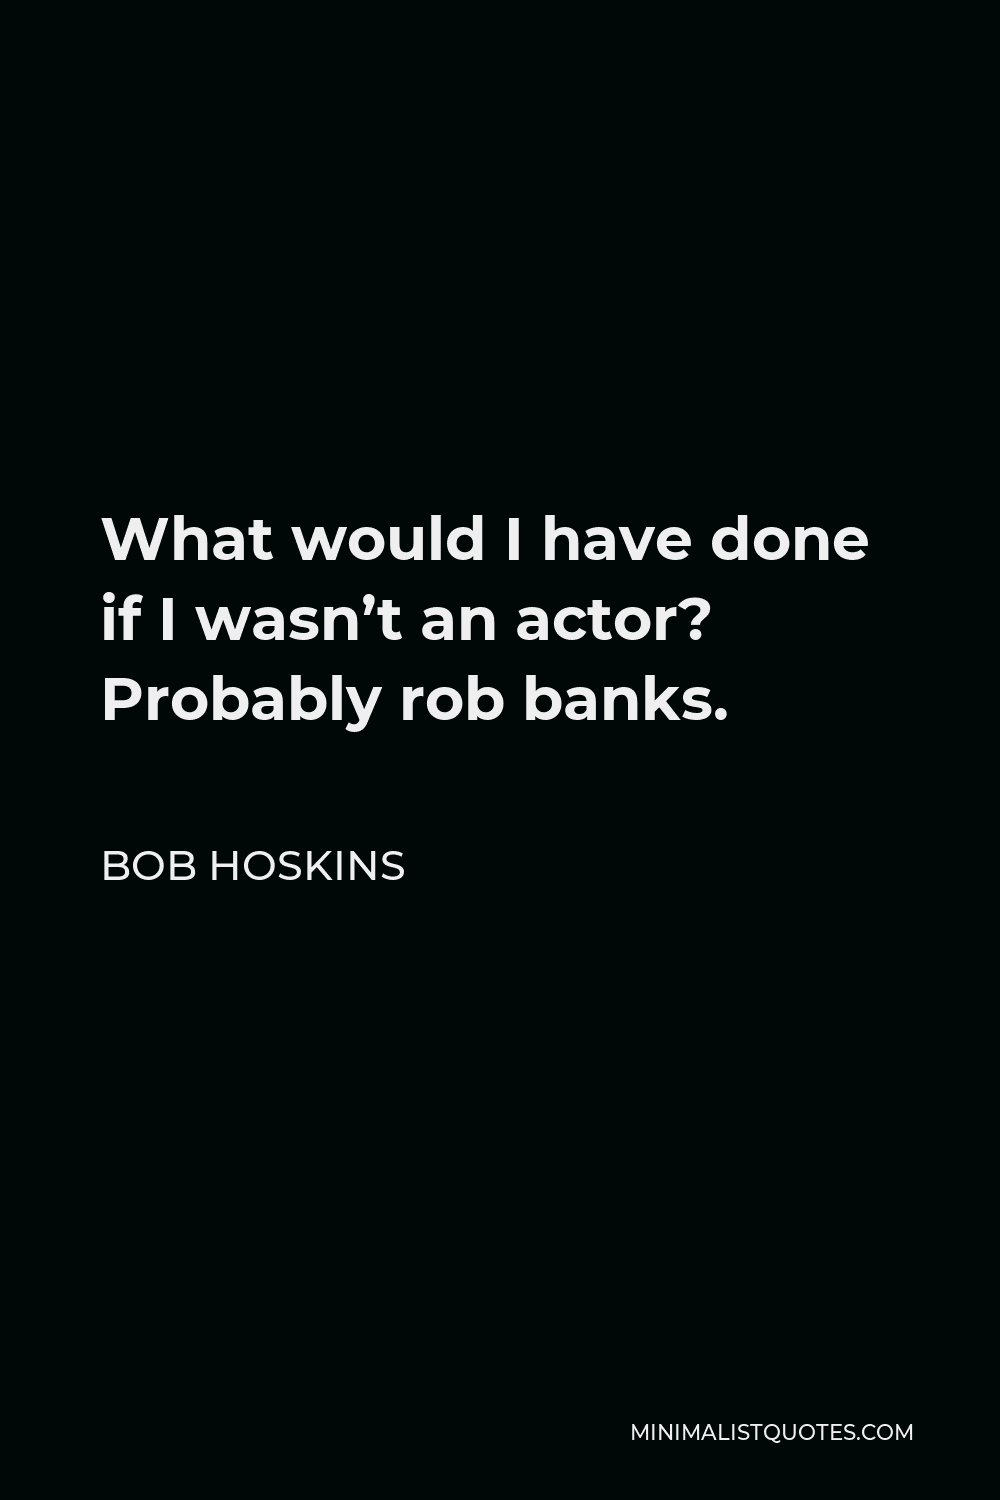 Bob Hoskins Quote - What would I have done if I wasn’t an actor? Probably rob banks.